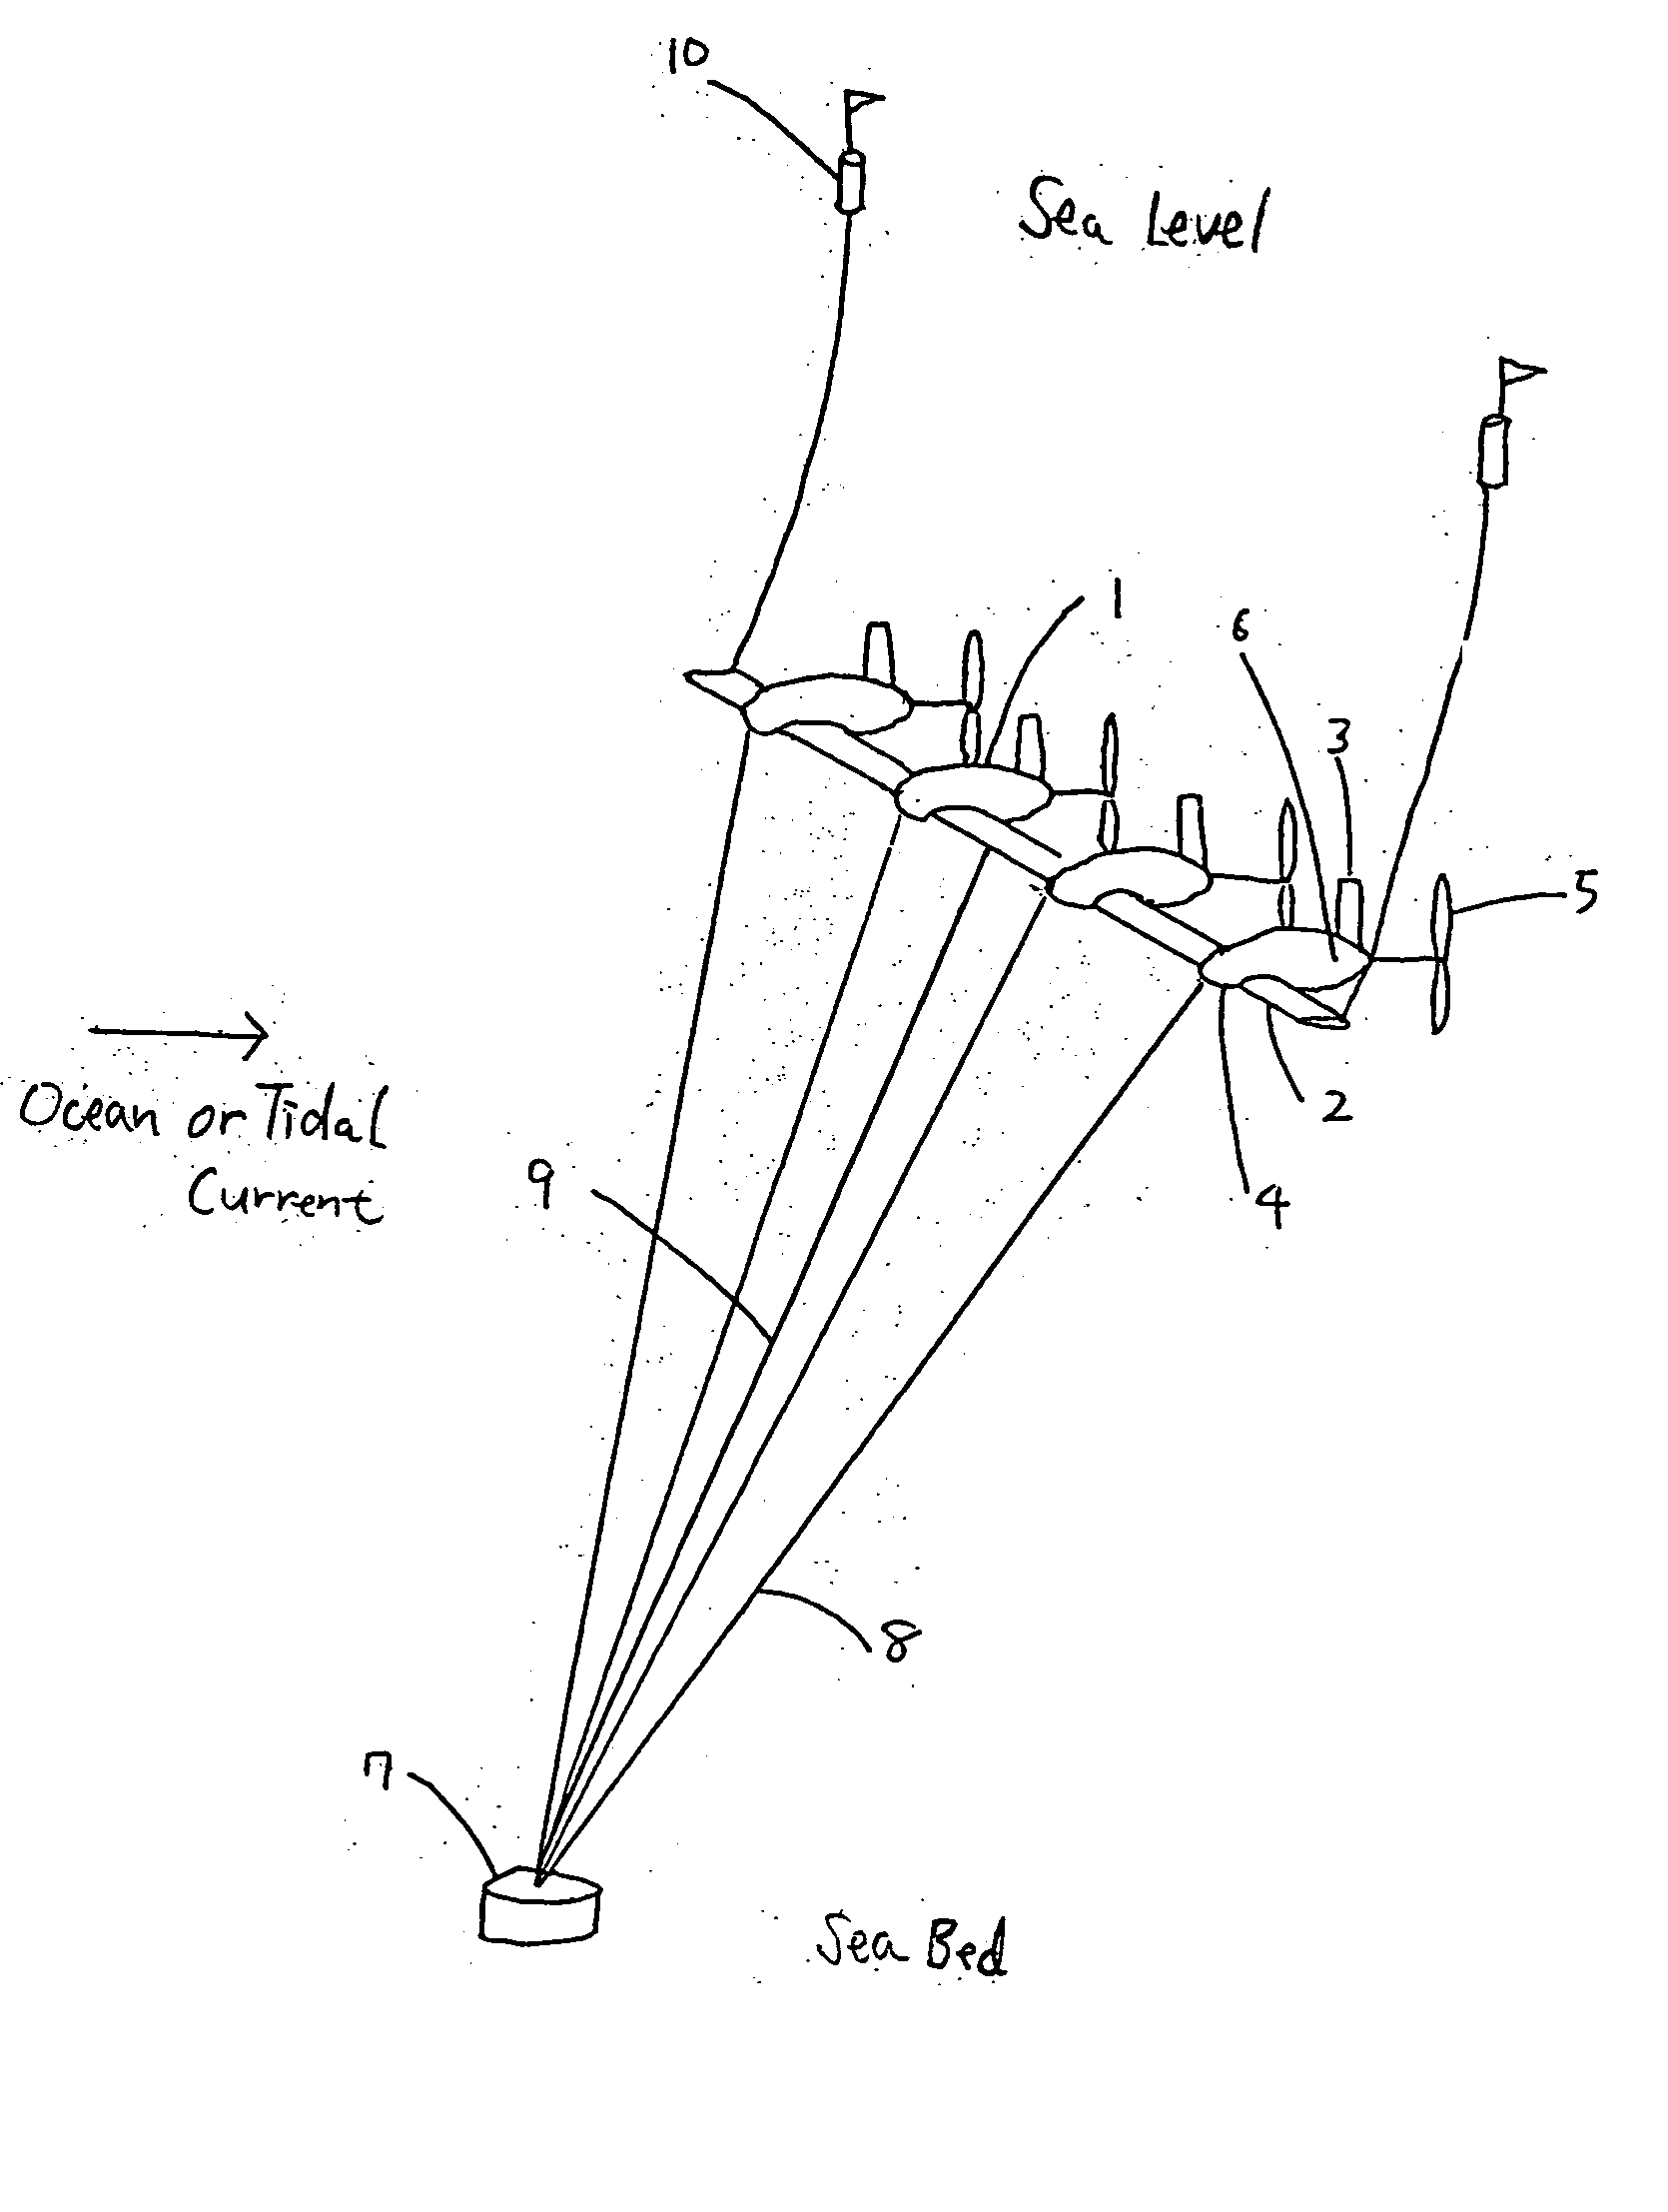 Method comprising electricity transmission, hydrogen productin and its transportation, from ocean and/or tidal current power generation apparatus, and control and moorage of ocean and/or tidal current power generation apparatus